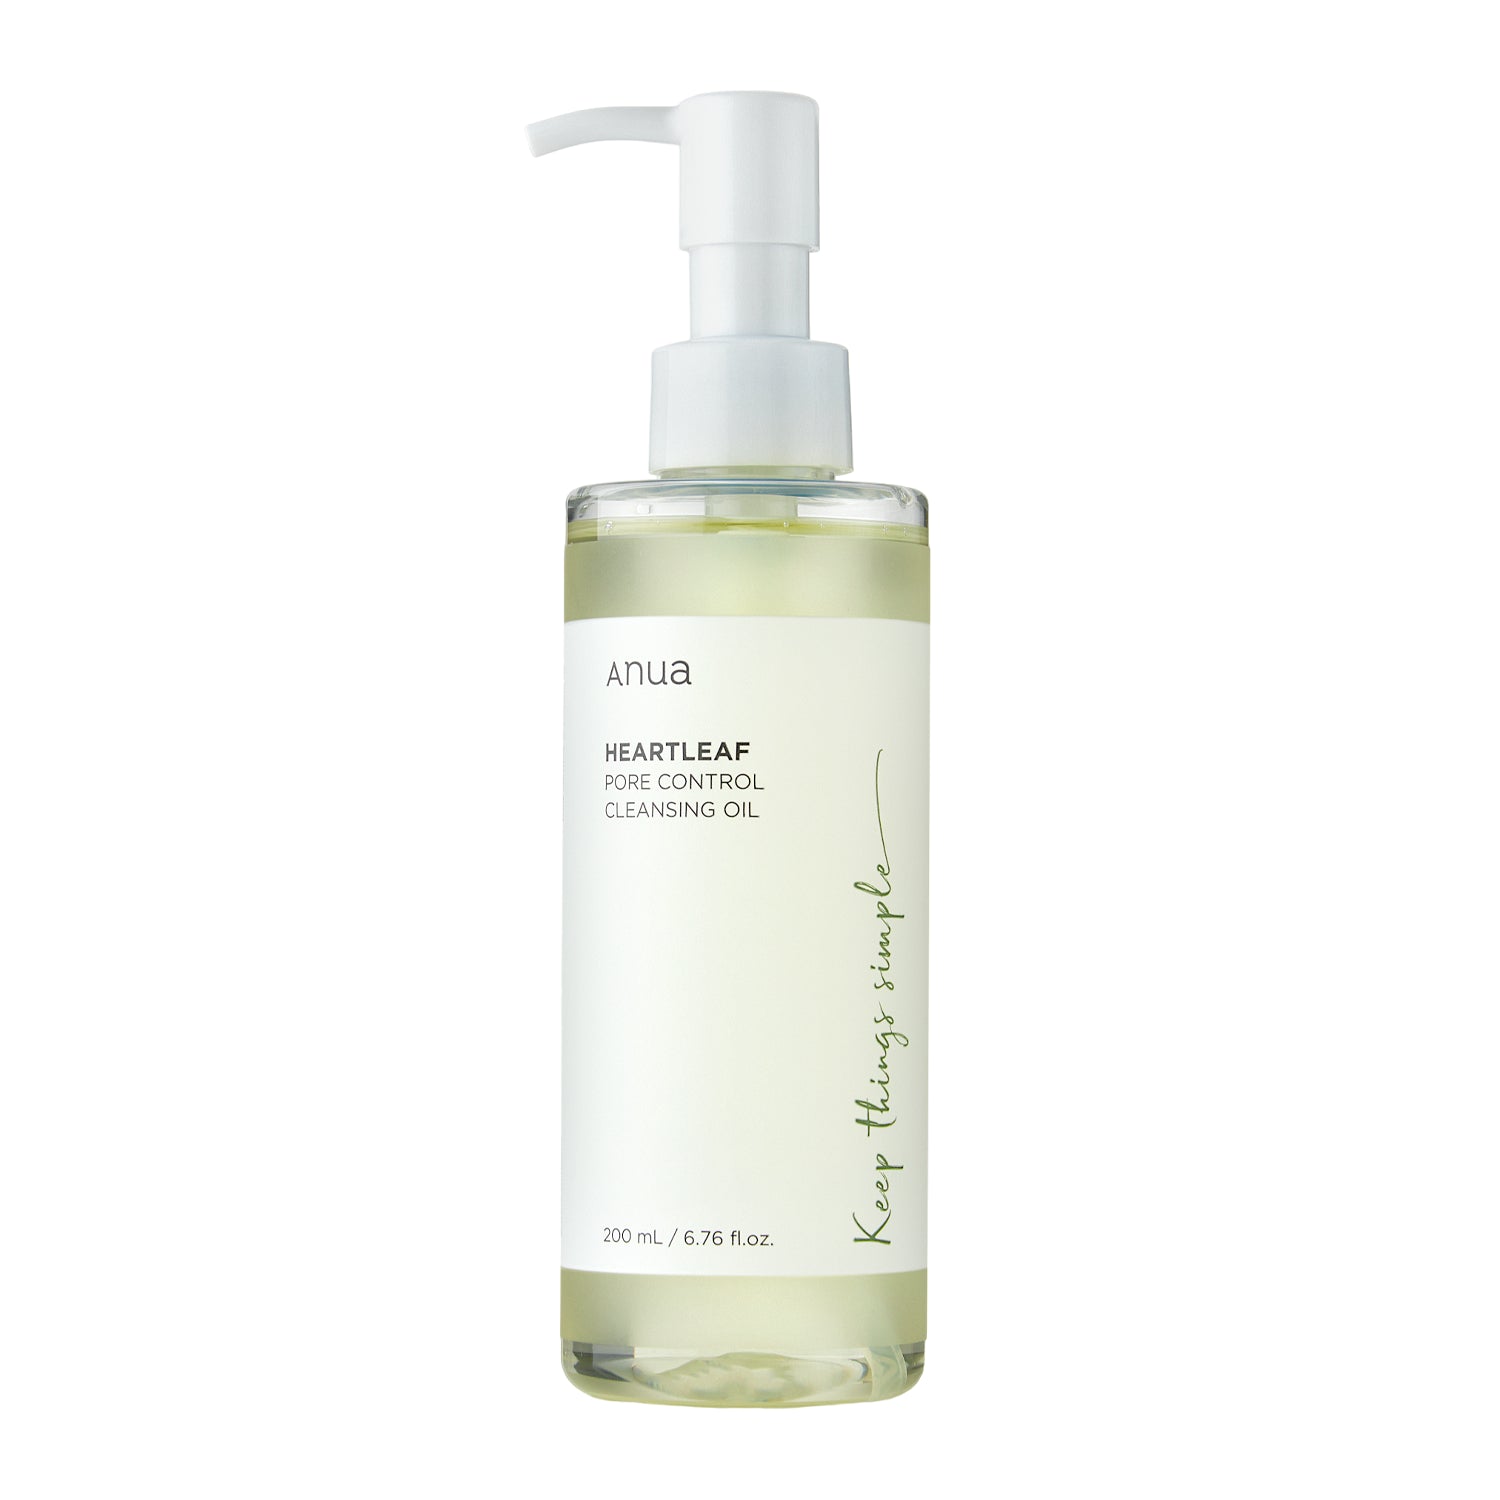 Anua - Heartleaf Pore Control Cleansing Oil - Facial Cleansing Oil - 200ml